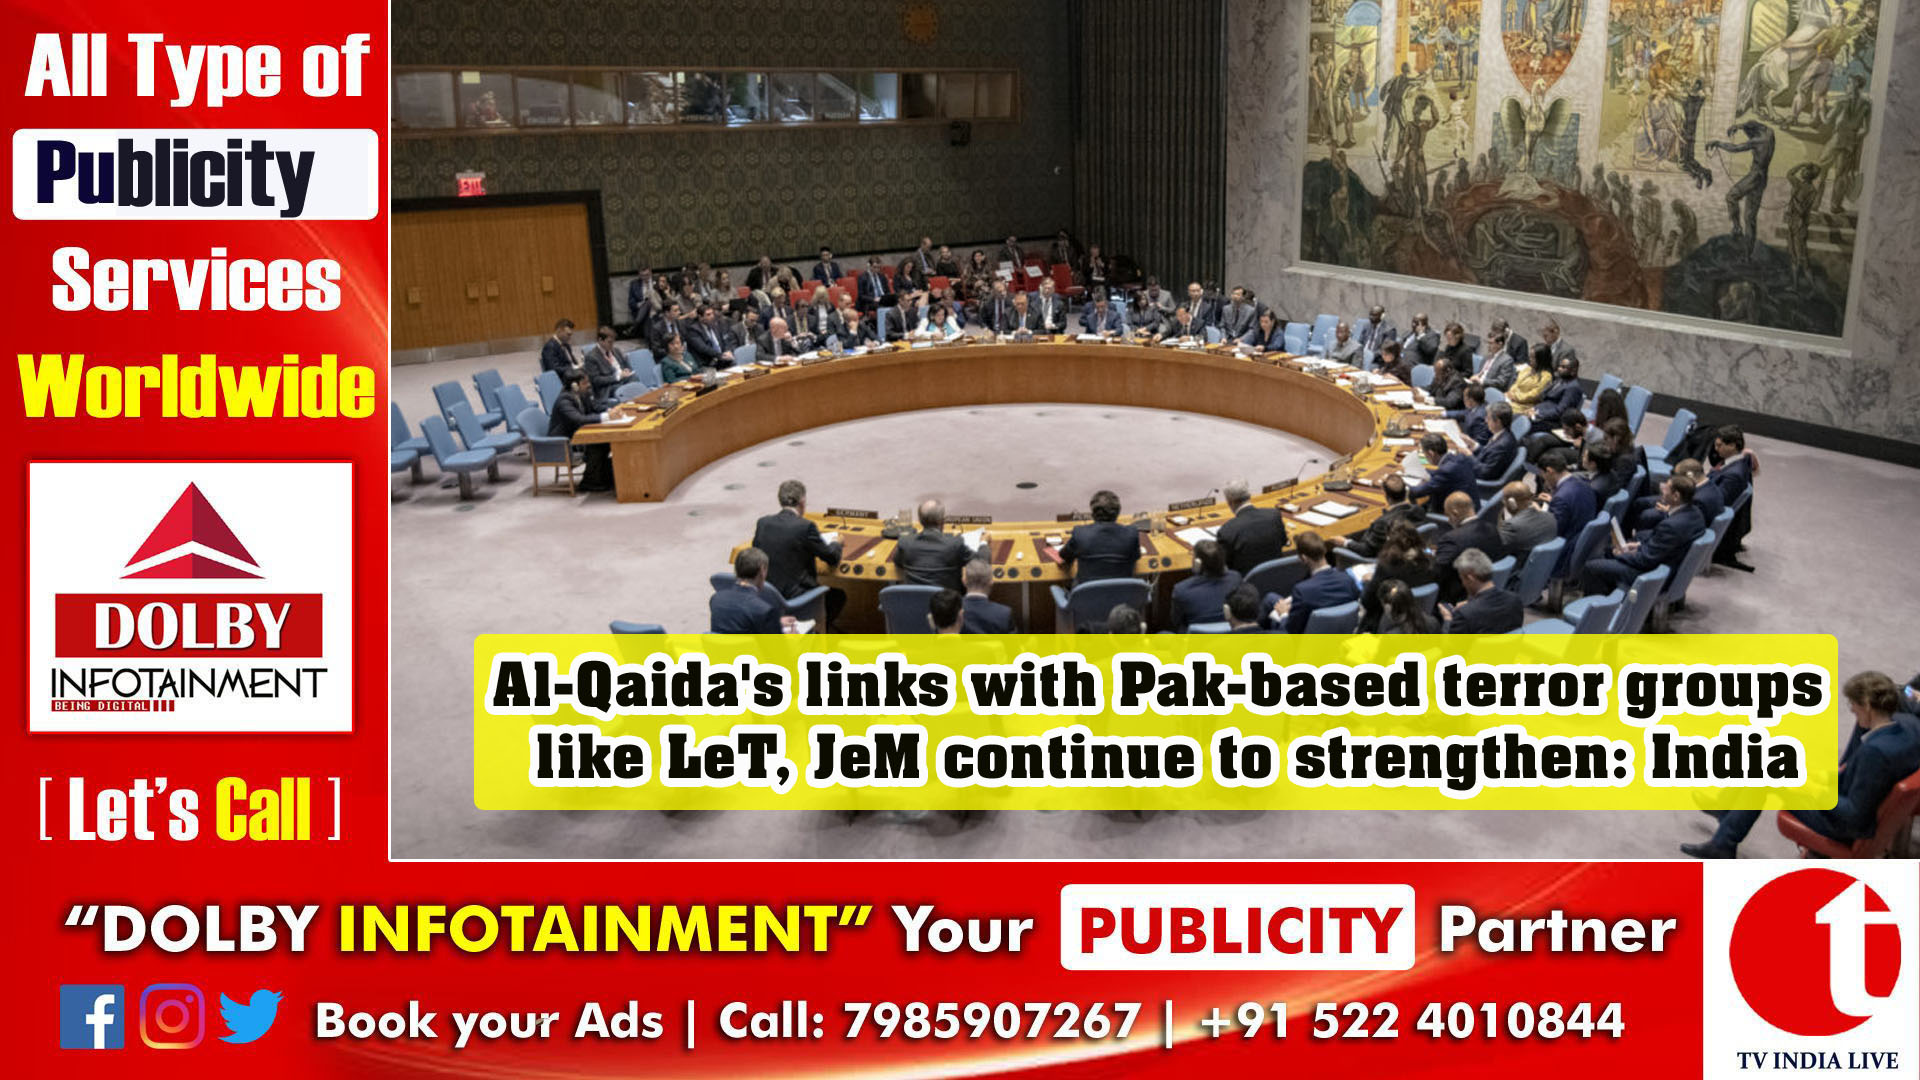 Al-Qaida's links with Pak-based terror groups like LeT, JeM continue to strengthen: India at UN